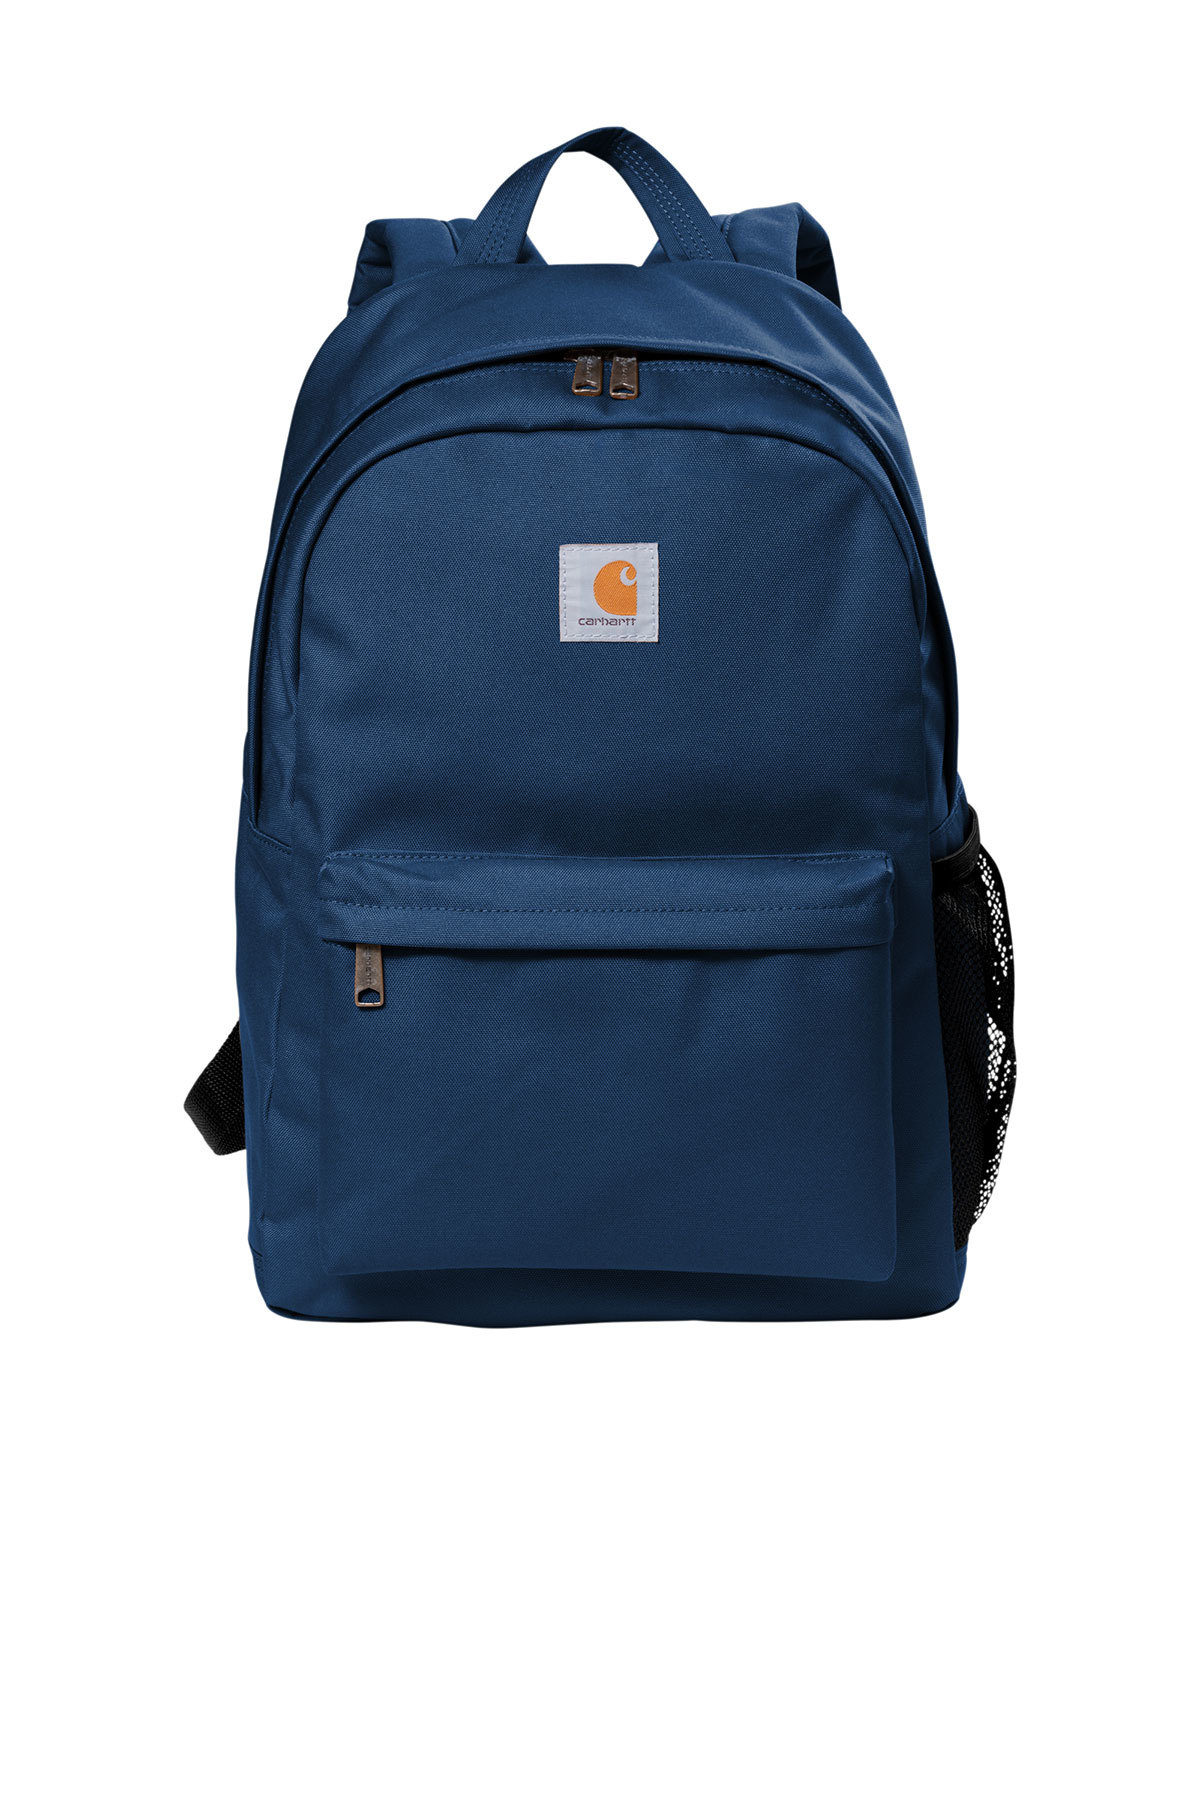 Hardship On foot dividend Carhartt Canvas Backpack | Product | SanMar